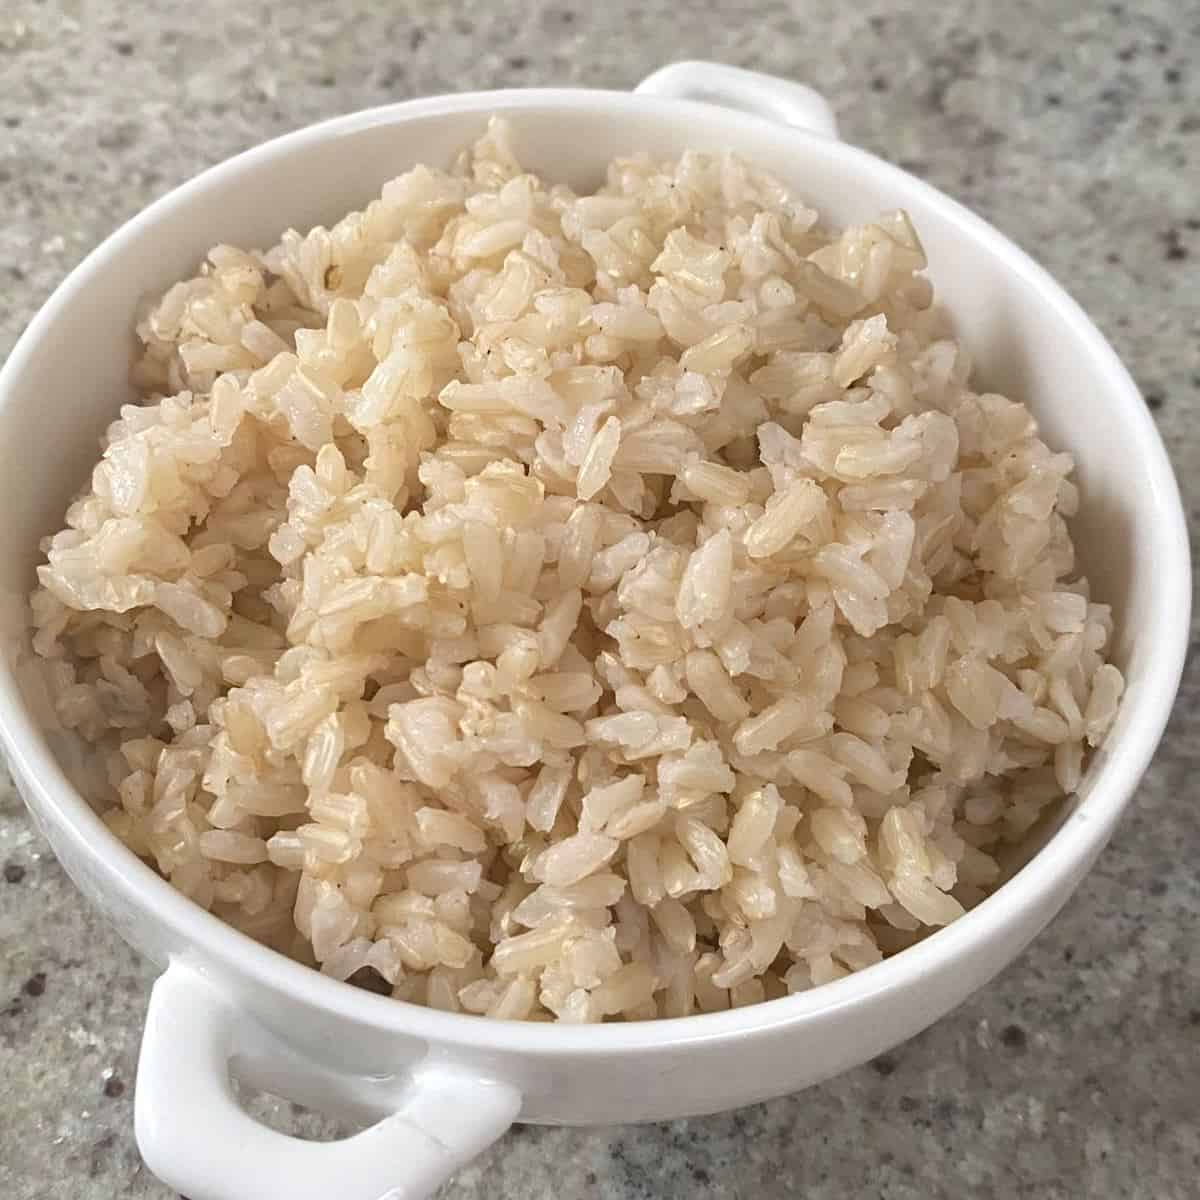 How To Cook Rice And Steam Vegetables At The Same Time In The Yum